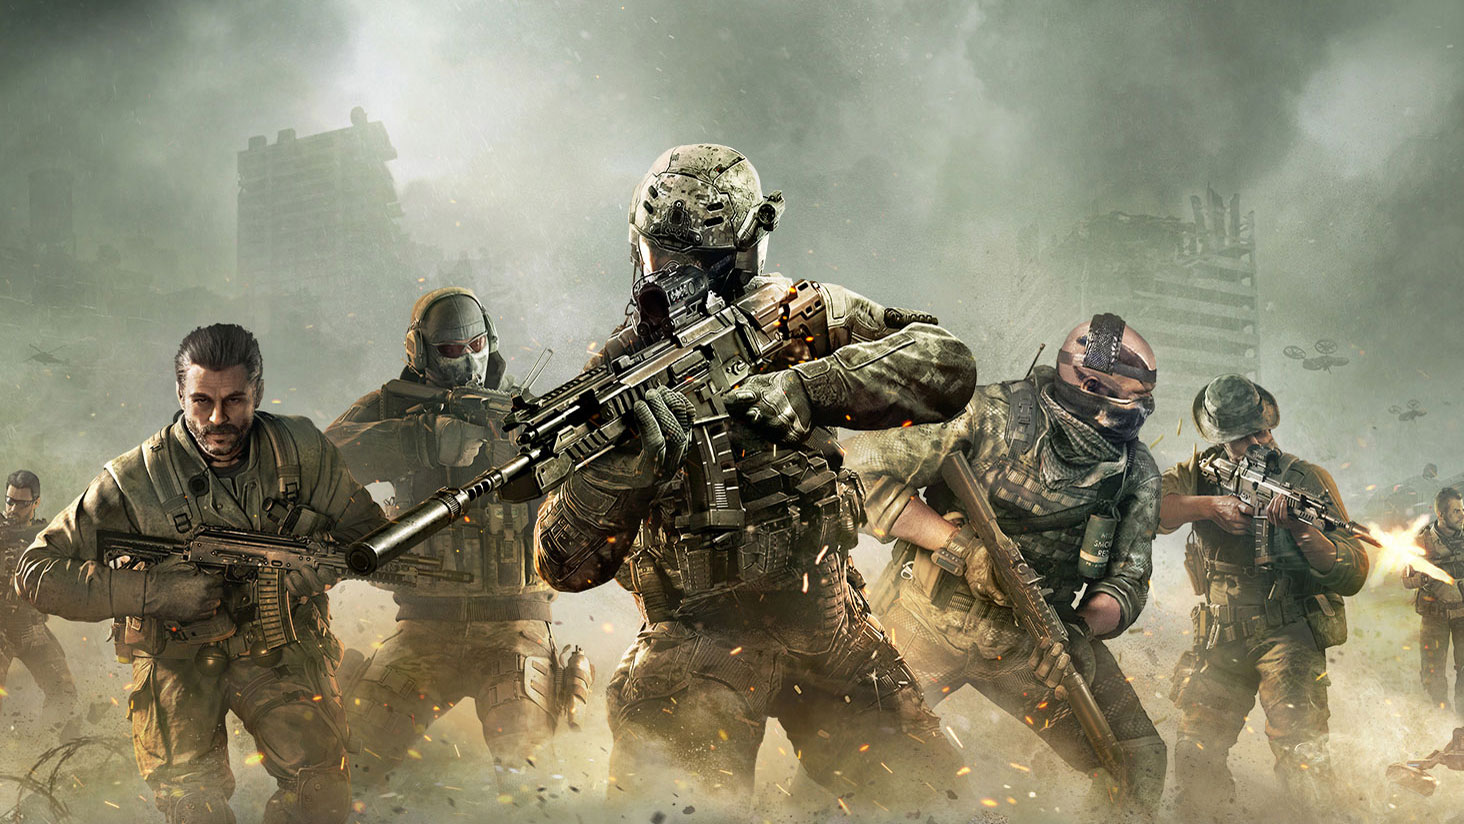 You'll soon be able to play Call of Duty on your smartphone